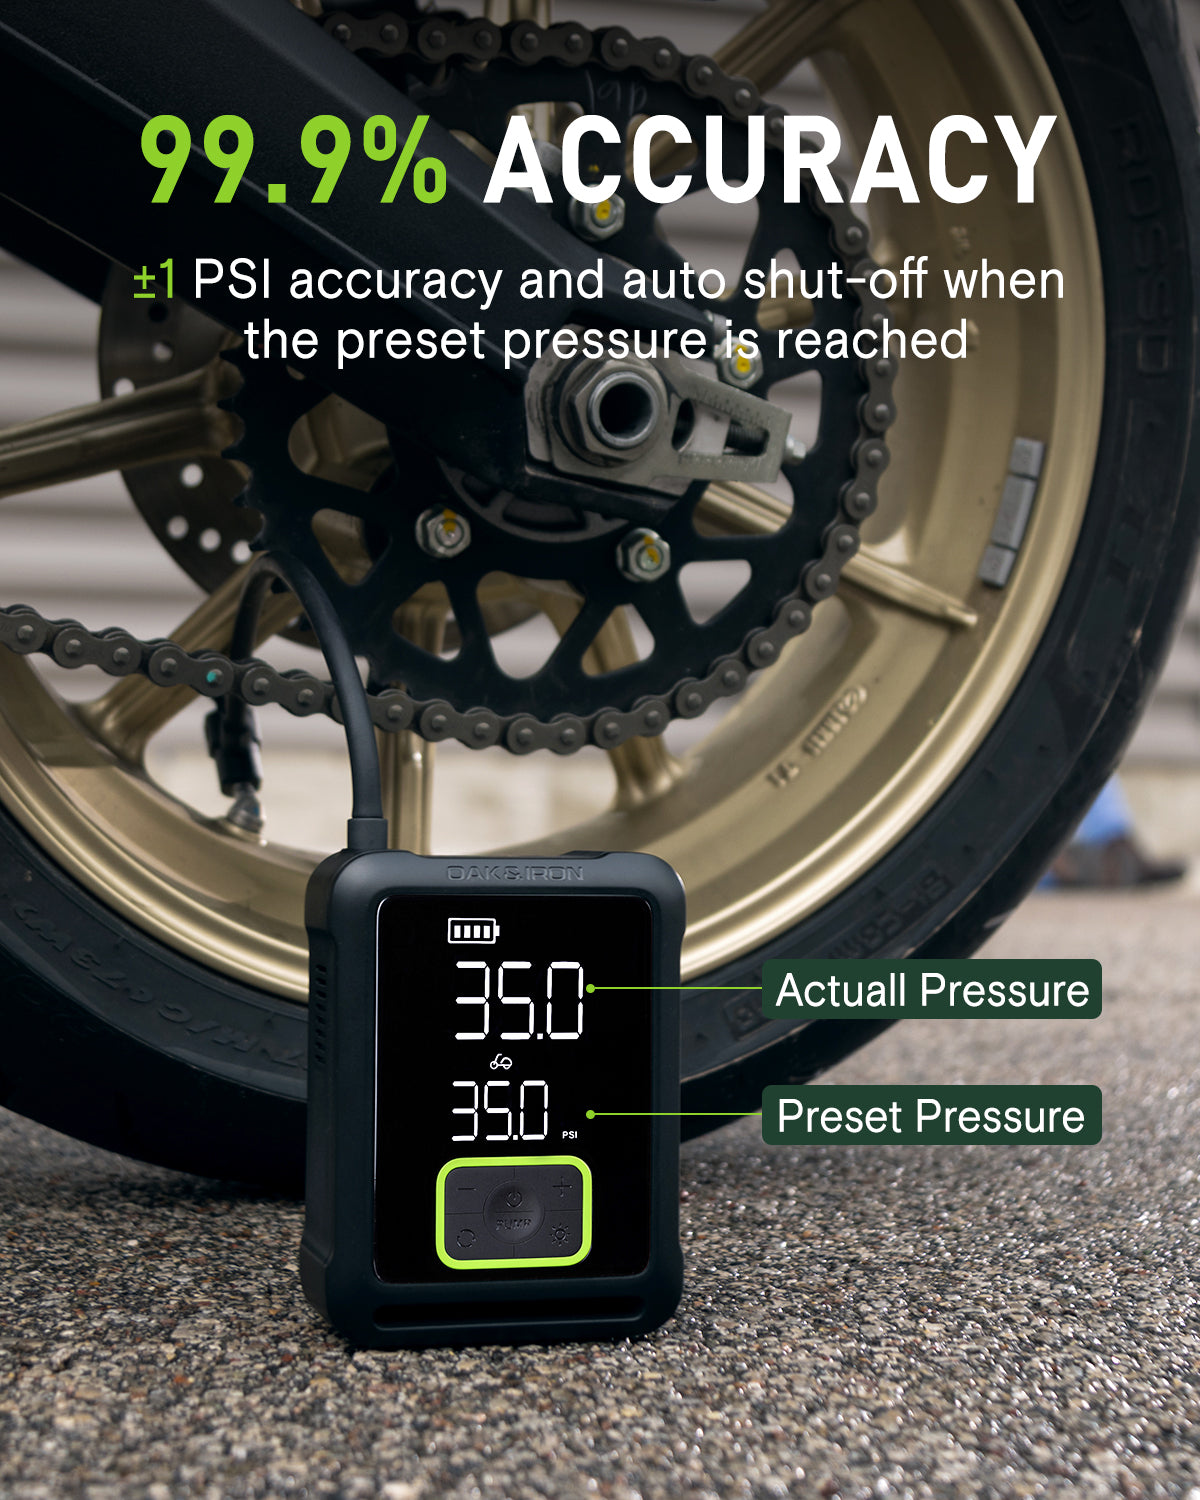 ONE Pro Portable Tire Inflator - 4X Faster and Extra Smart by OAK